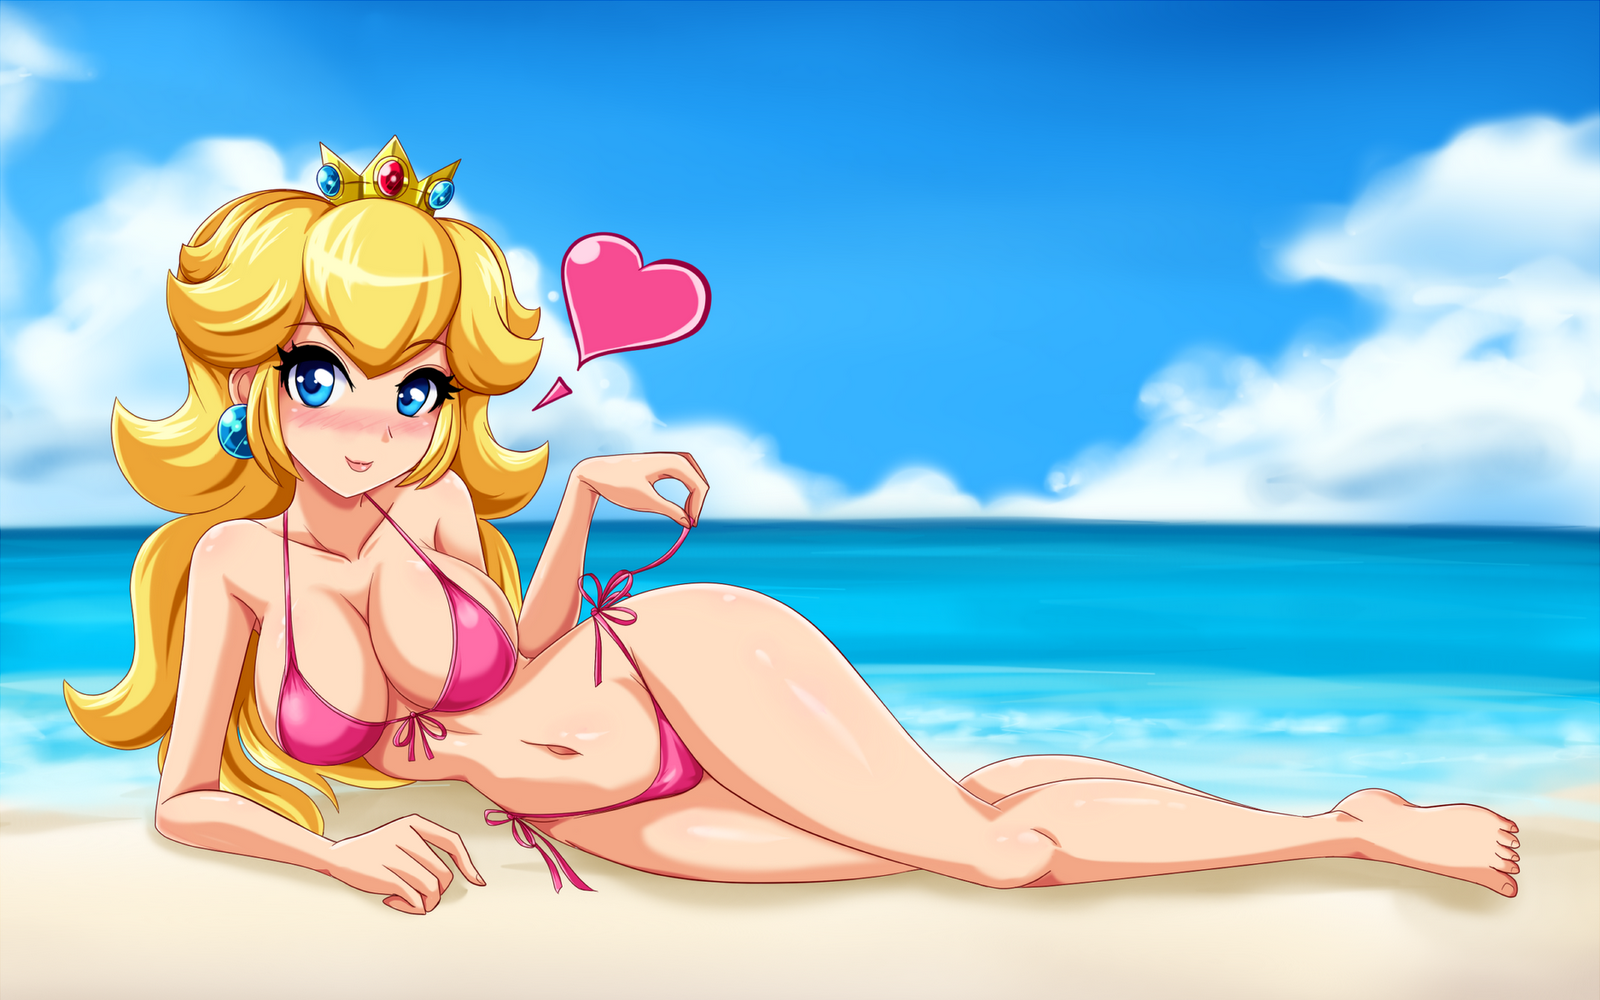 Hot Mario Brothers Peach Naked Images